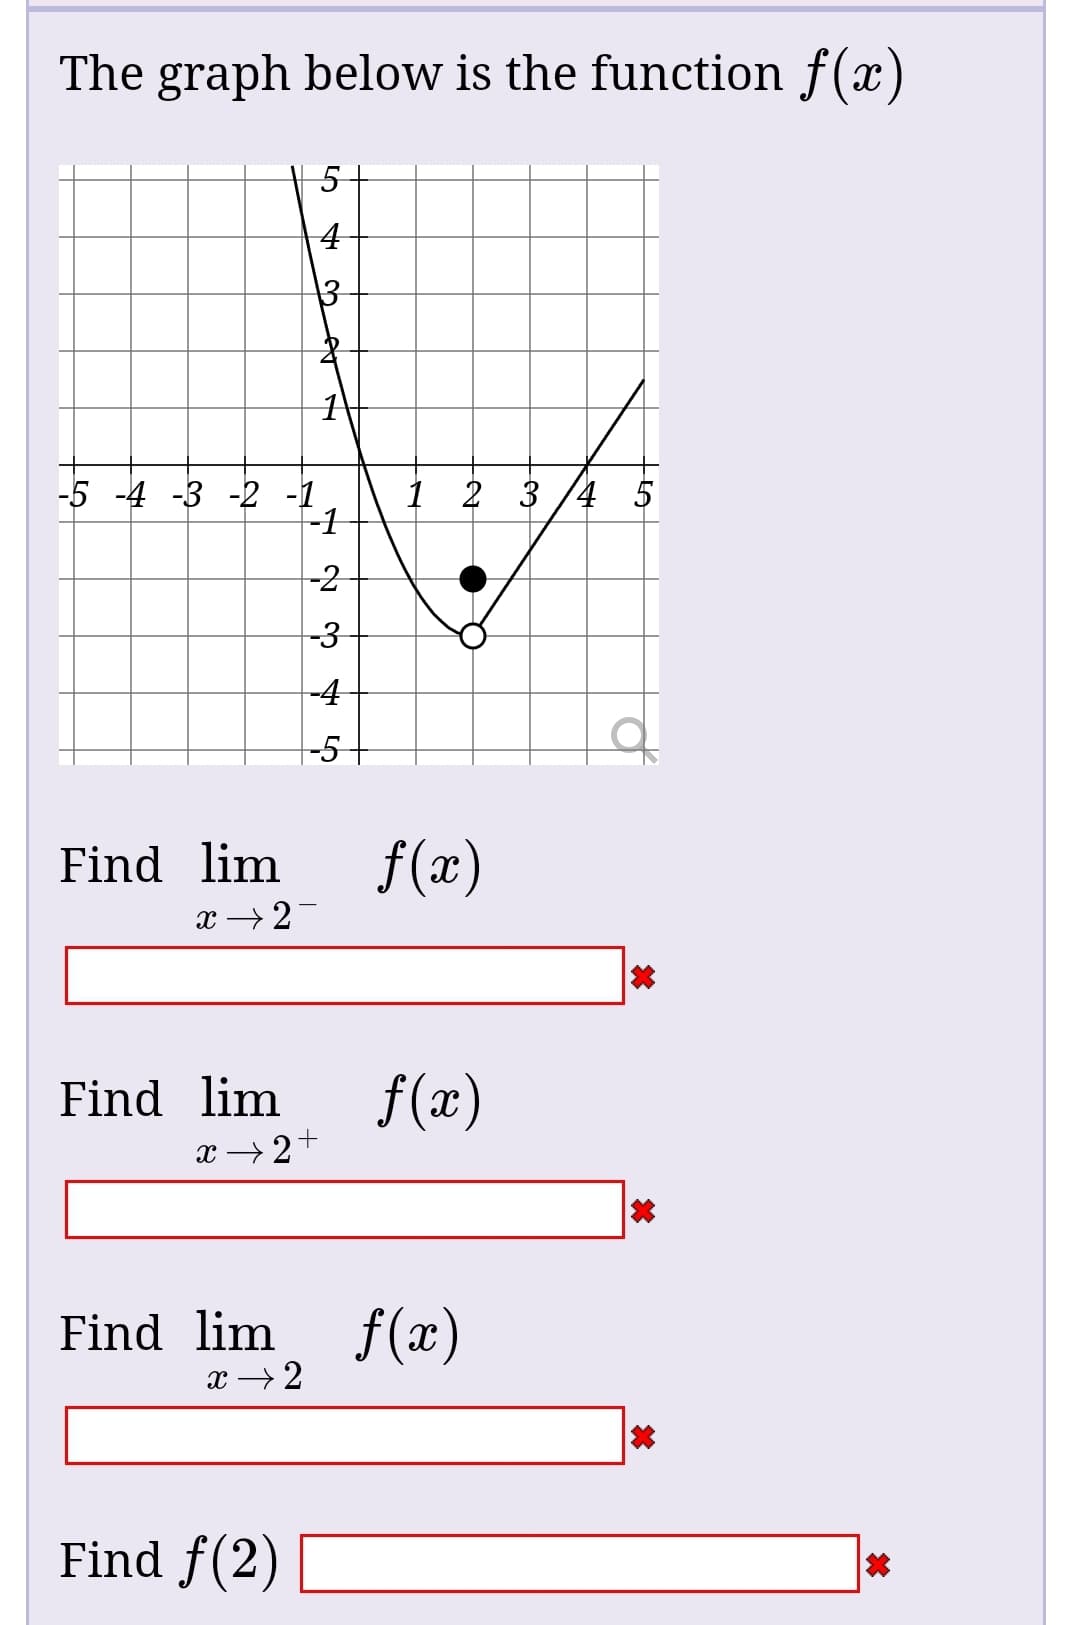 The graph below is the function f(x)
-5 -4 -3 -2 -1
-1
1 2 3 /4 5
-2
-3
-4
-5
f(x)
Find lim
f(x)
Find lim
f(x)
Find lim
Find f(2)
